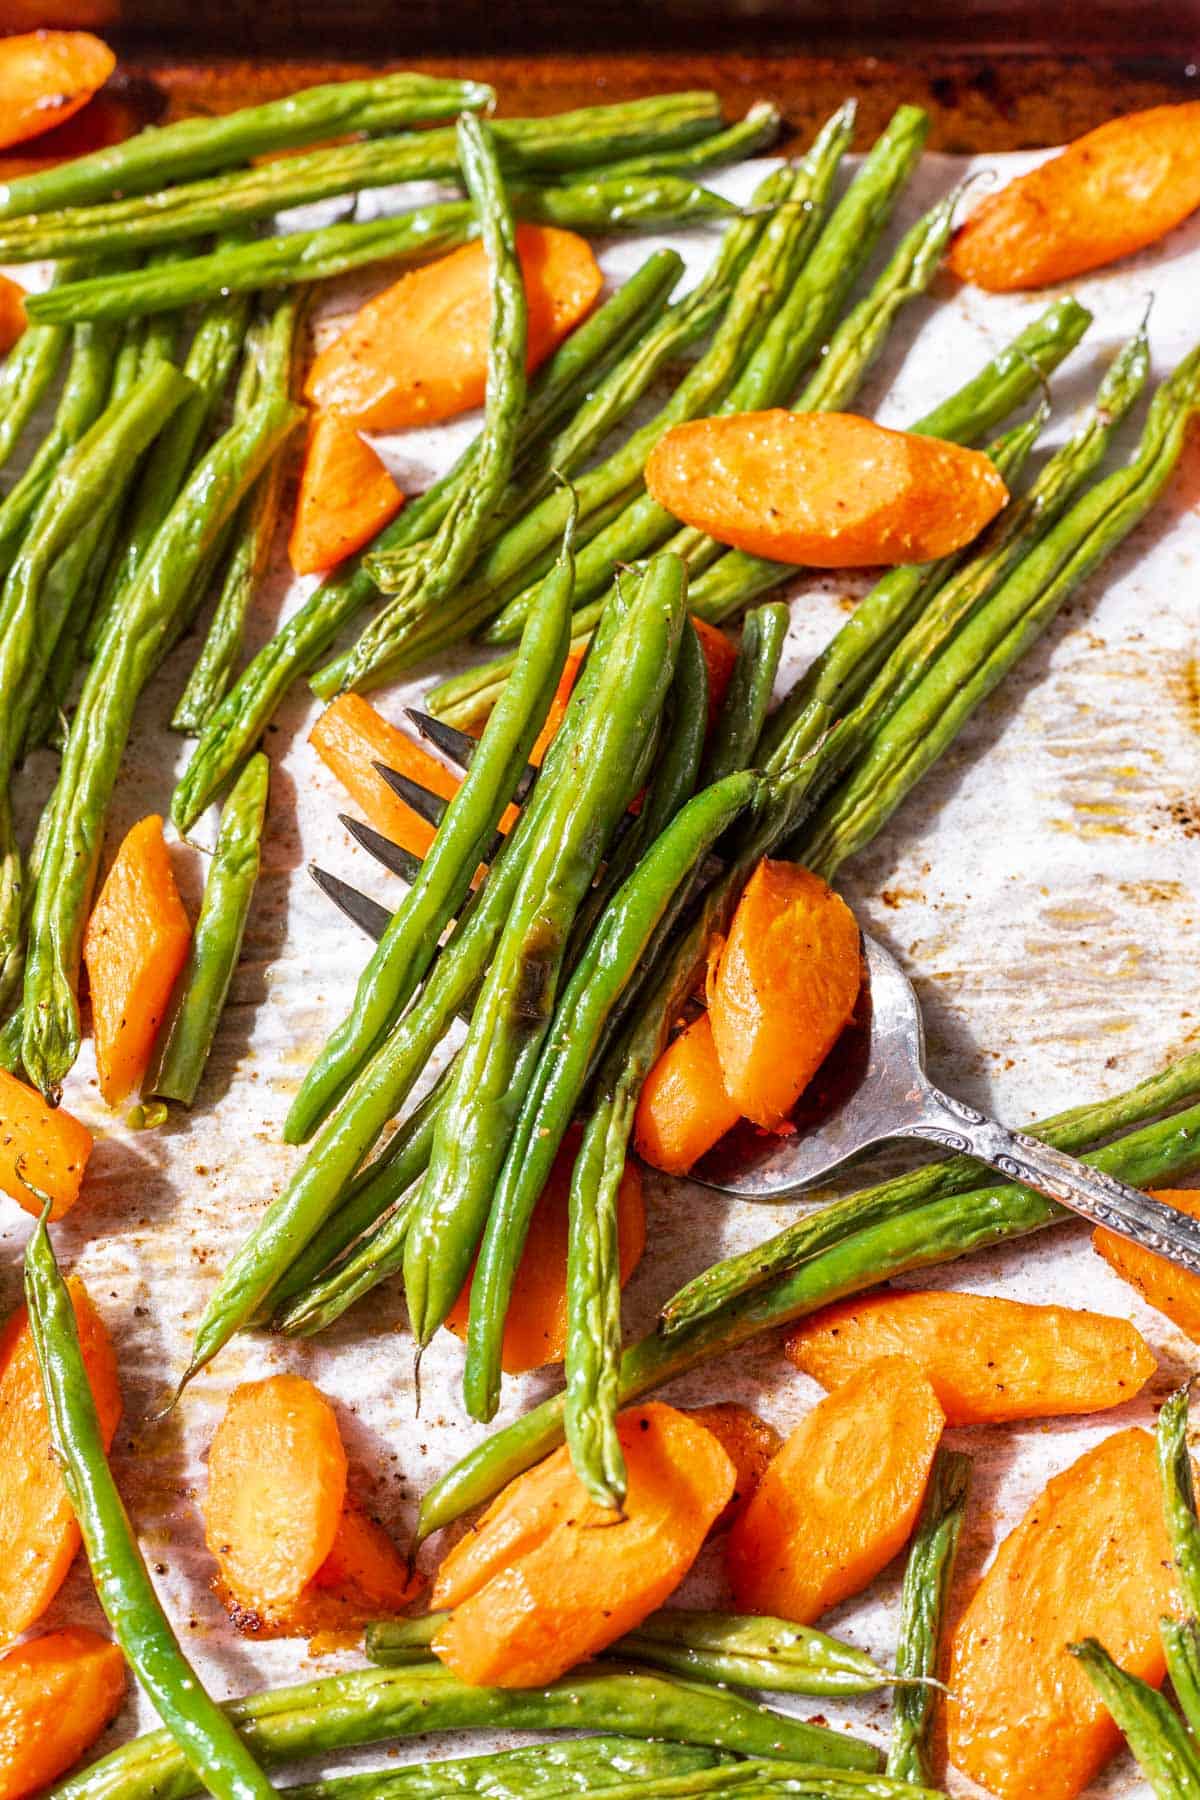 A serving fork scooping roasted green beans and carrots off a baking sheet.